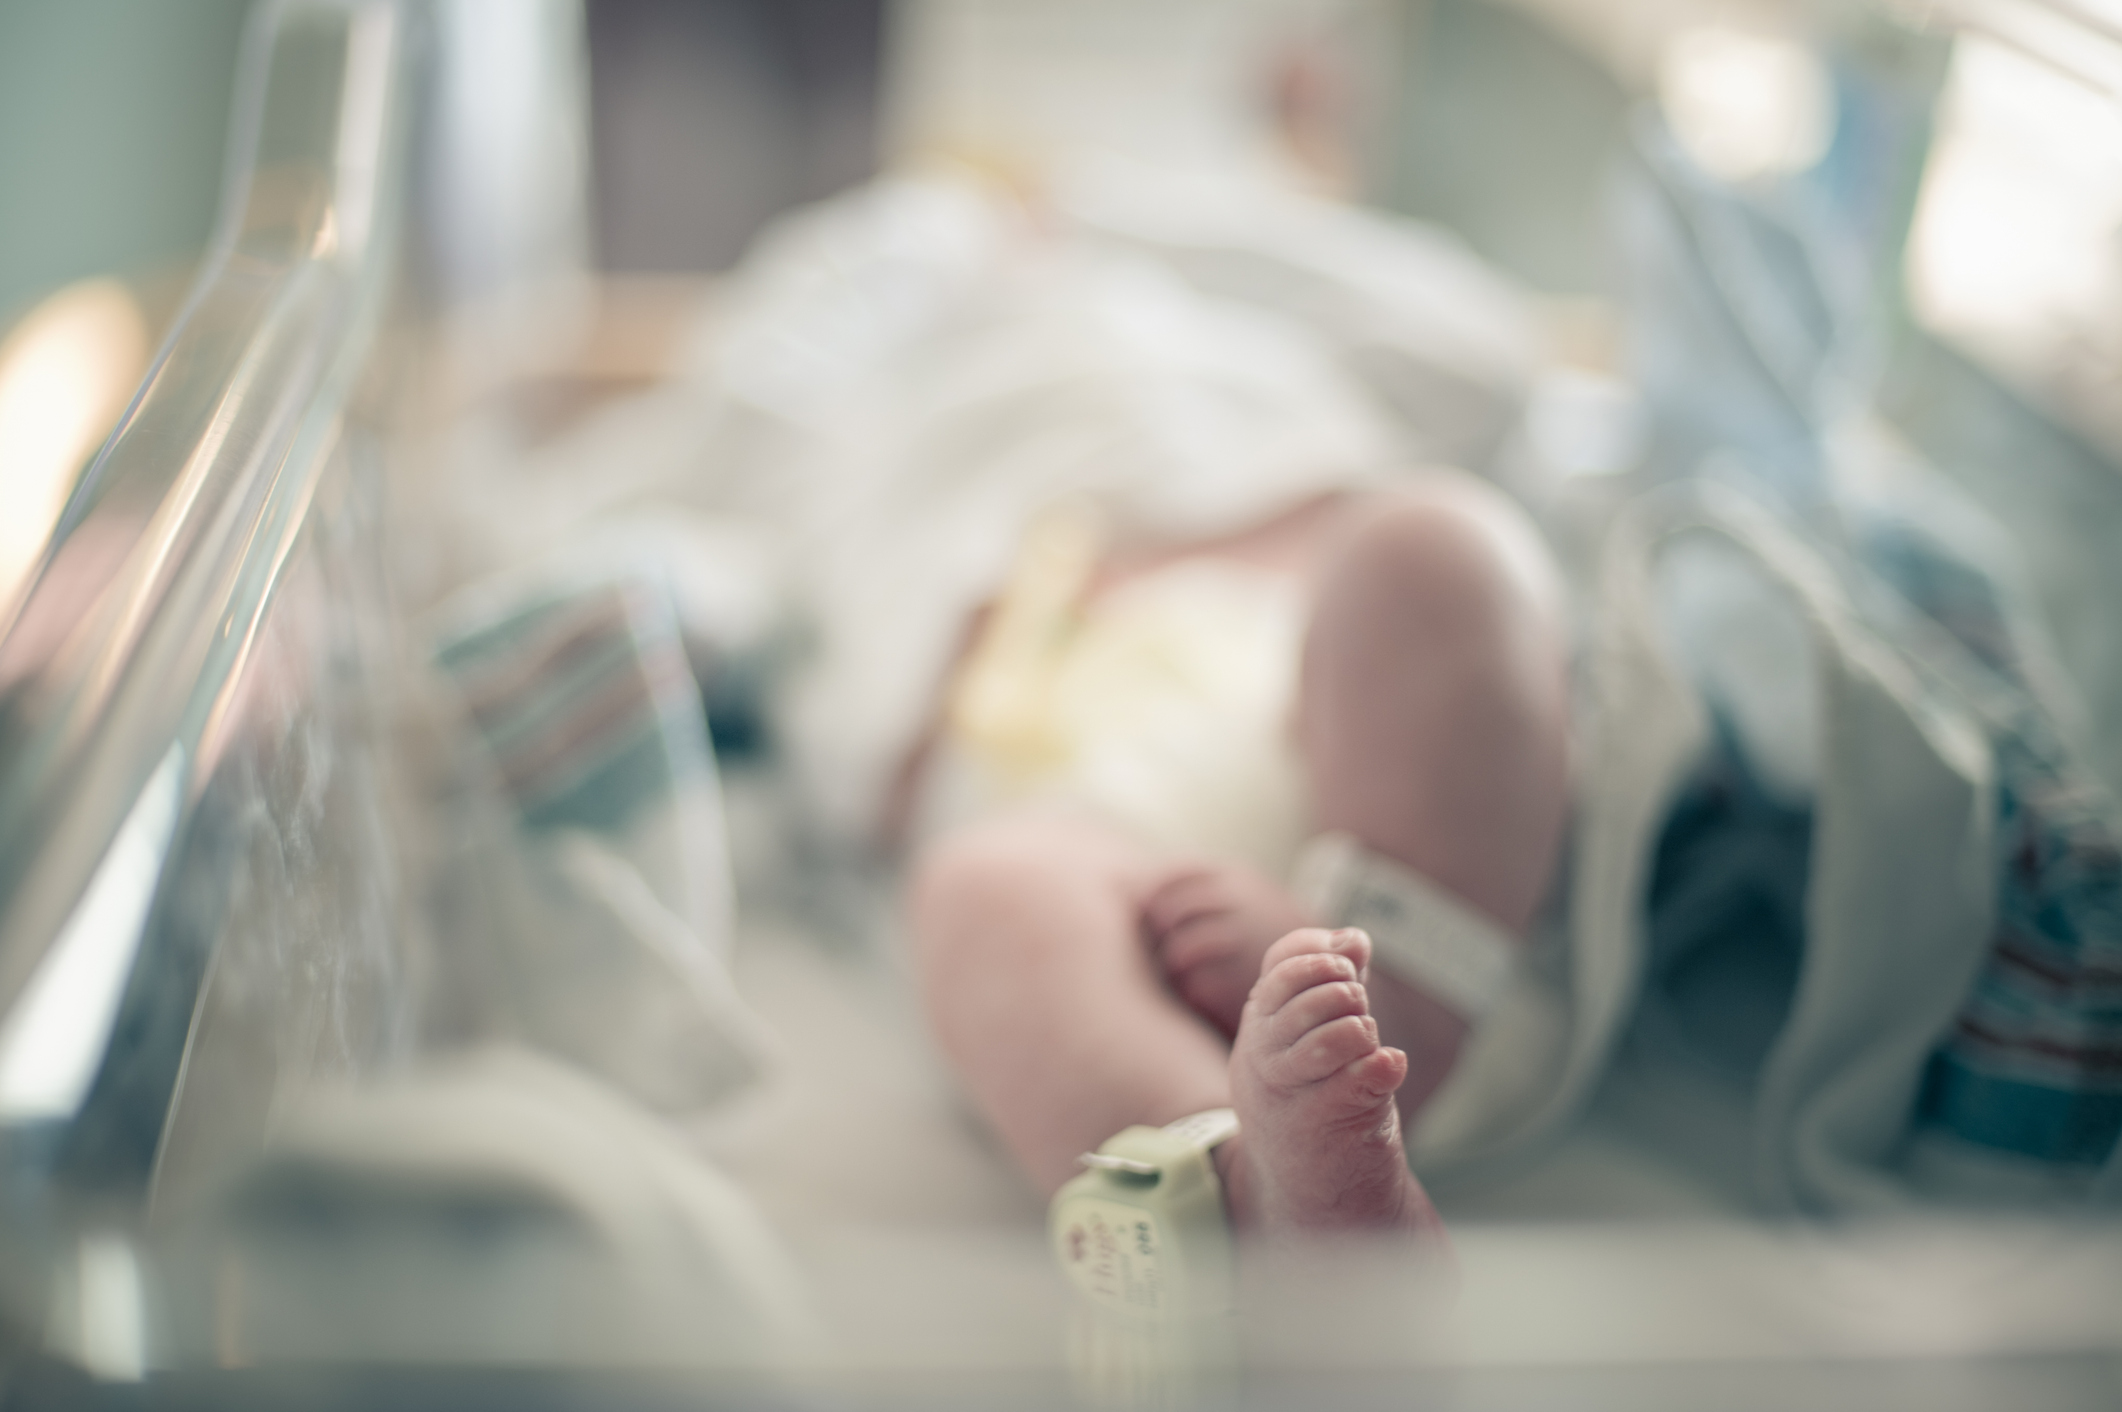 Massachusetts Hospital Group Doesn’t Automatically Report Neglect for Babies Born with Drugs in Systems